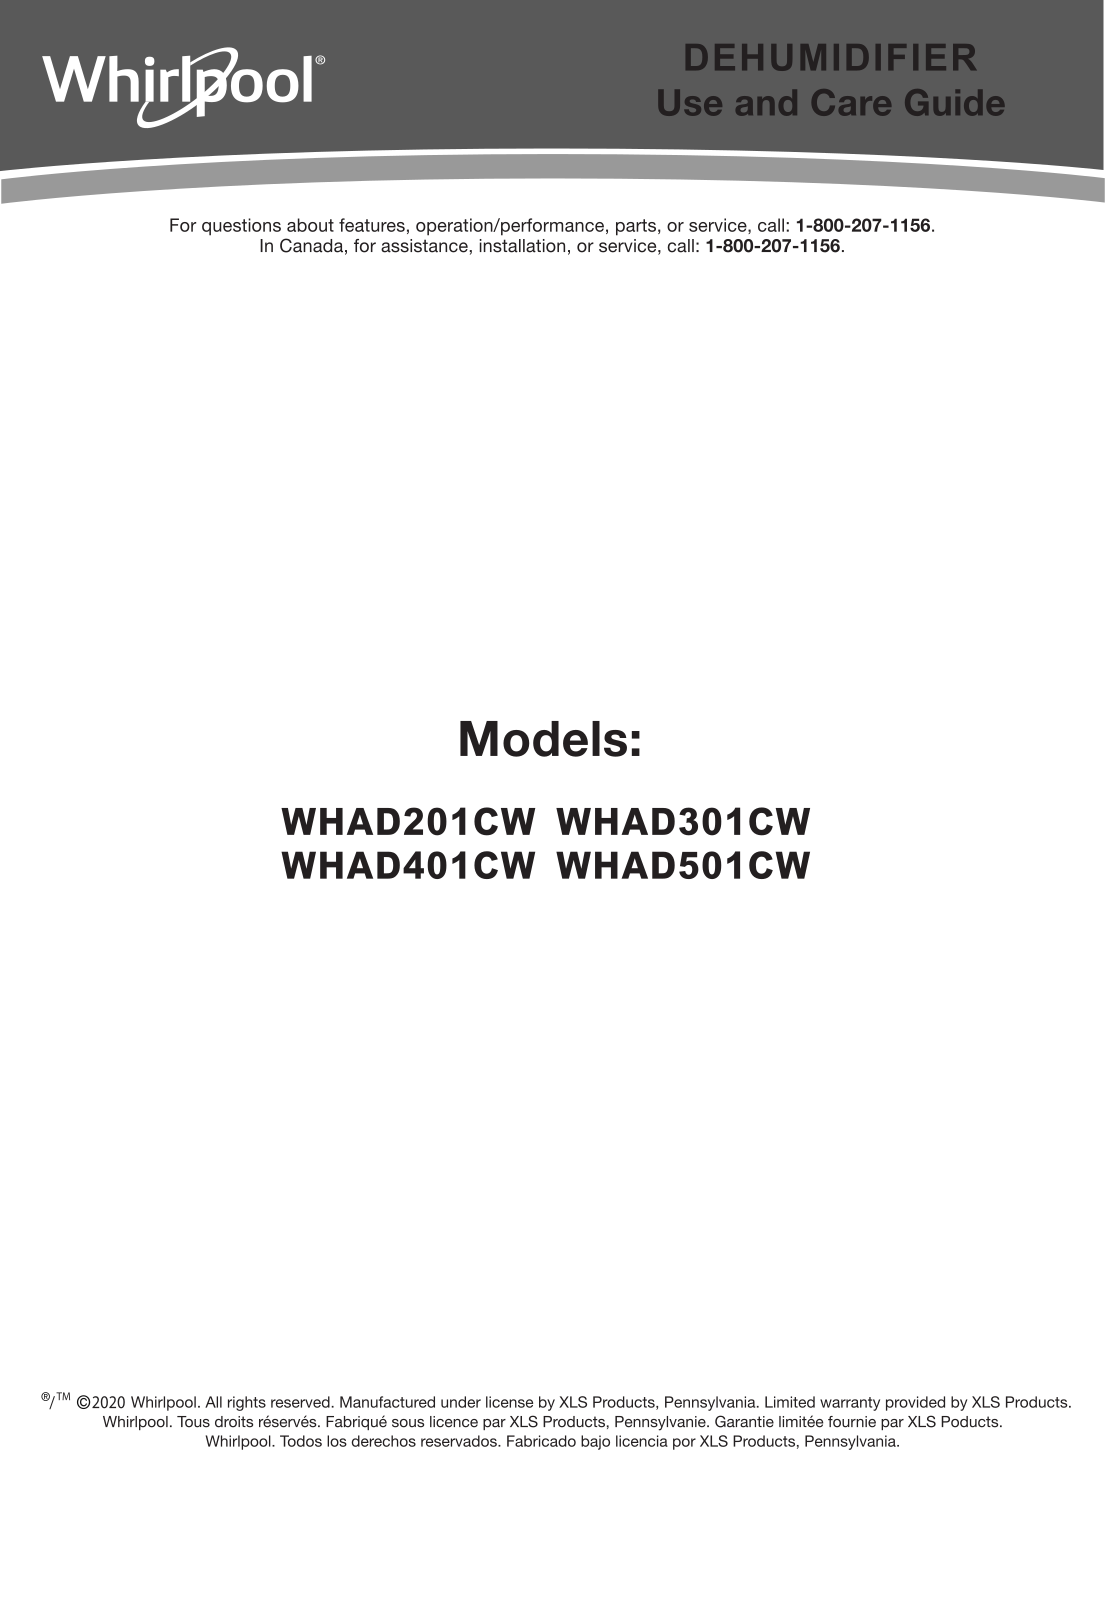 Whirlpool WHAD201CW, WHAD301CW Owner's Manual